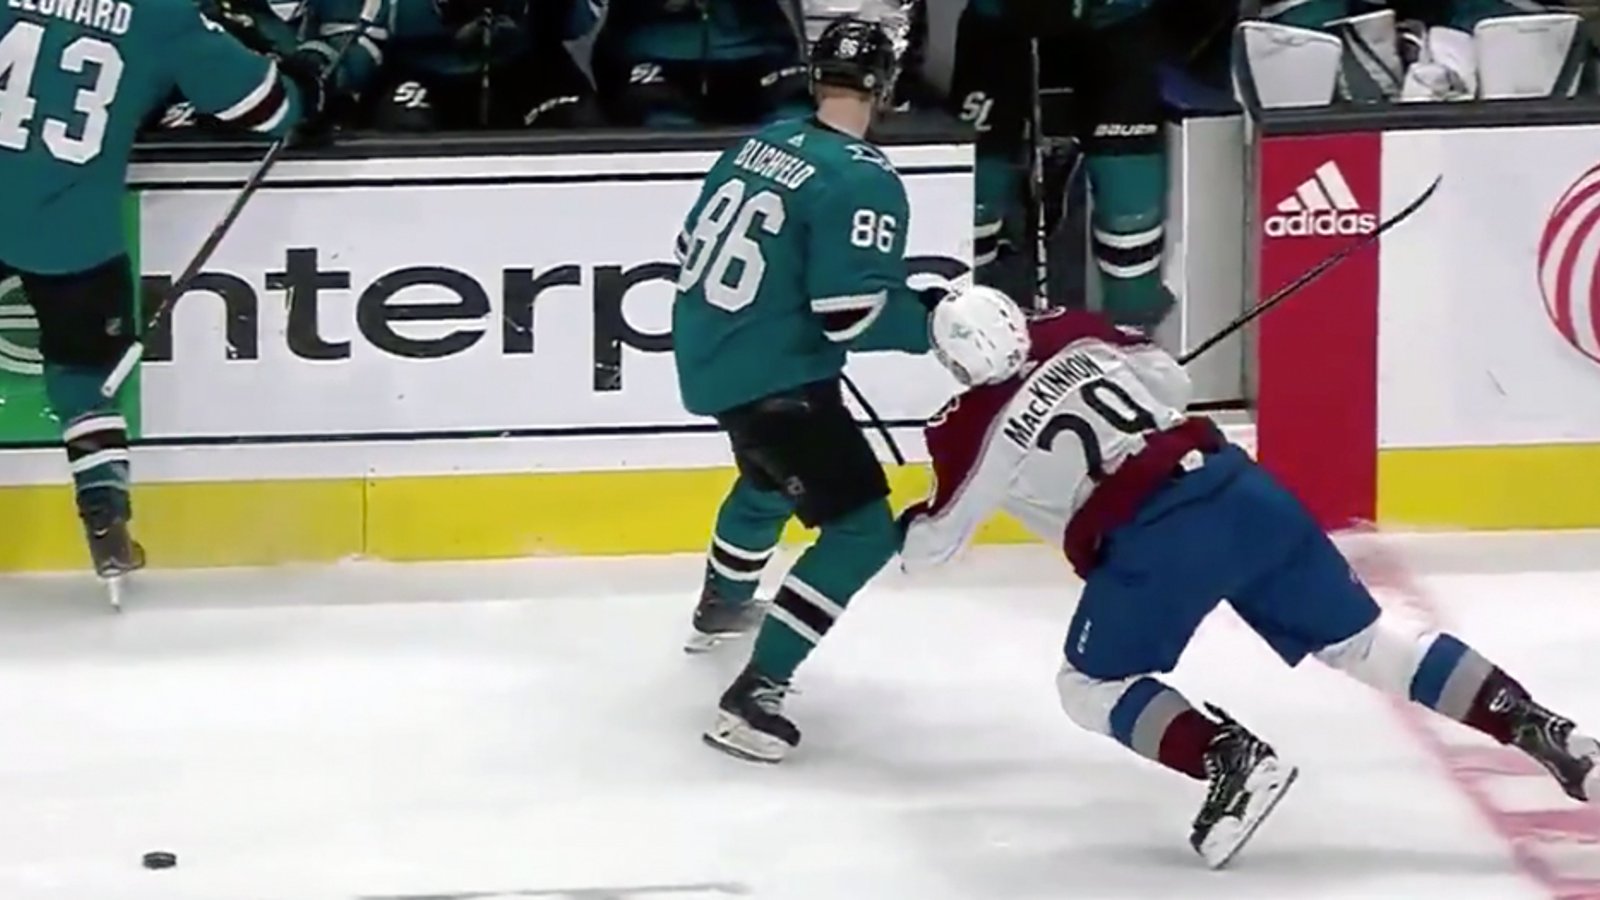 MacKinnon “doing good” after being knocked out of last night's game against Sharks